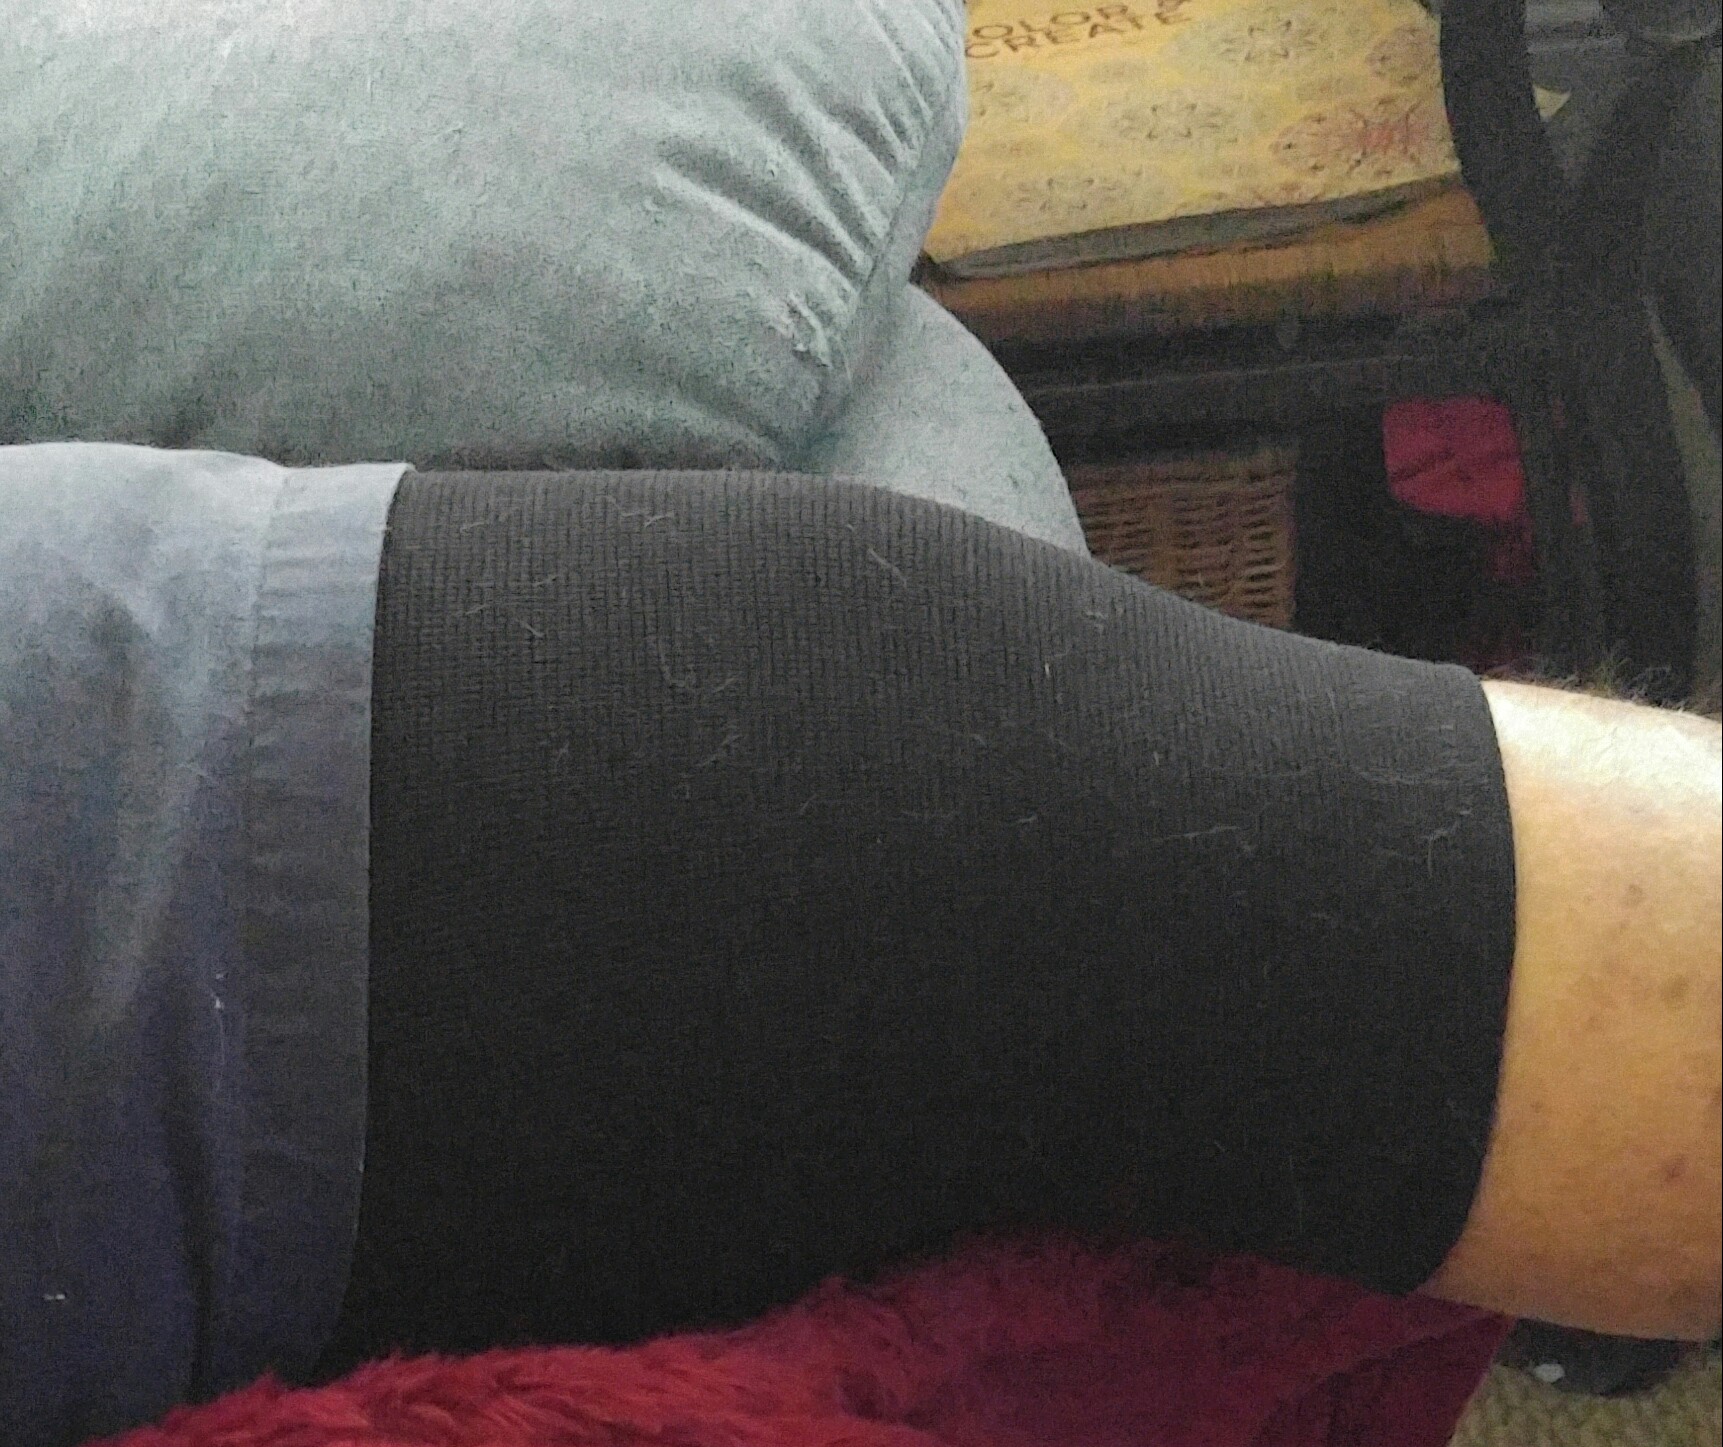 Thigh compression sleeve support brace